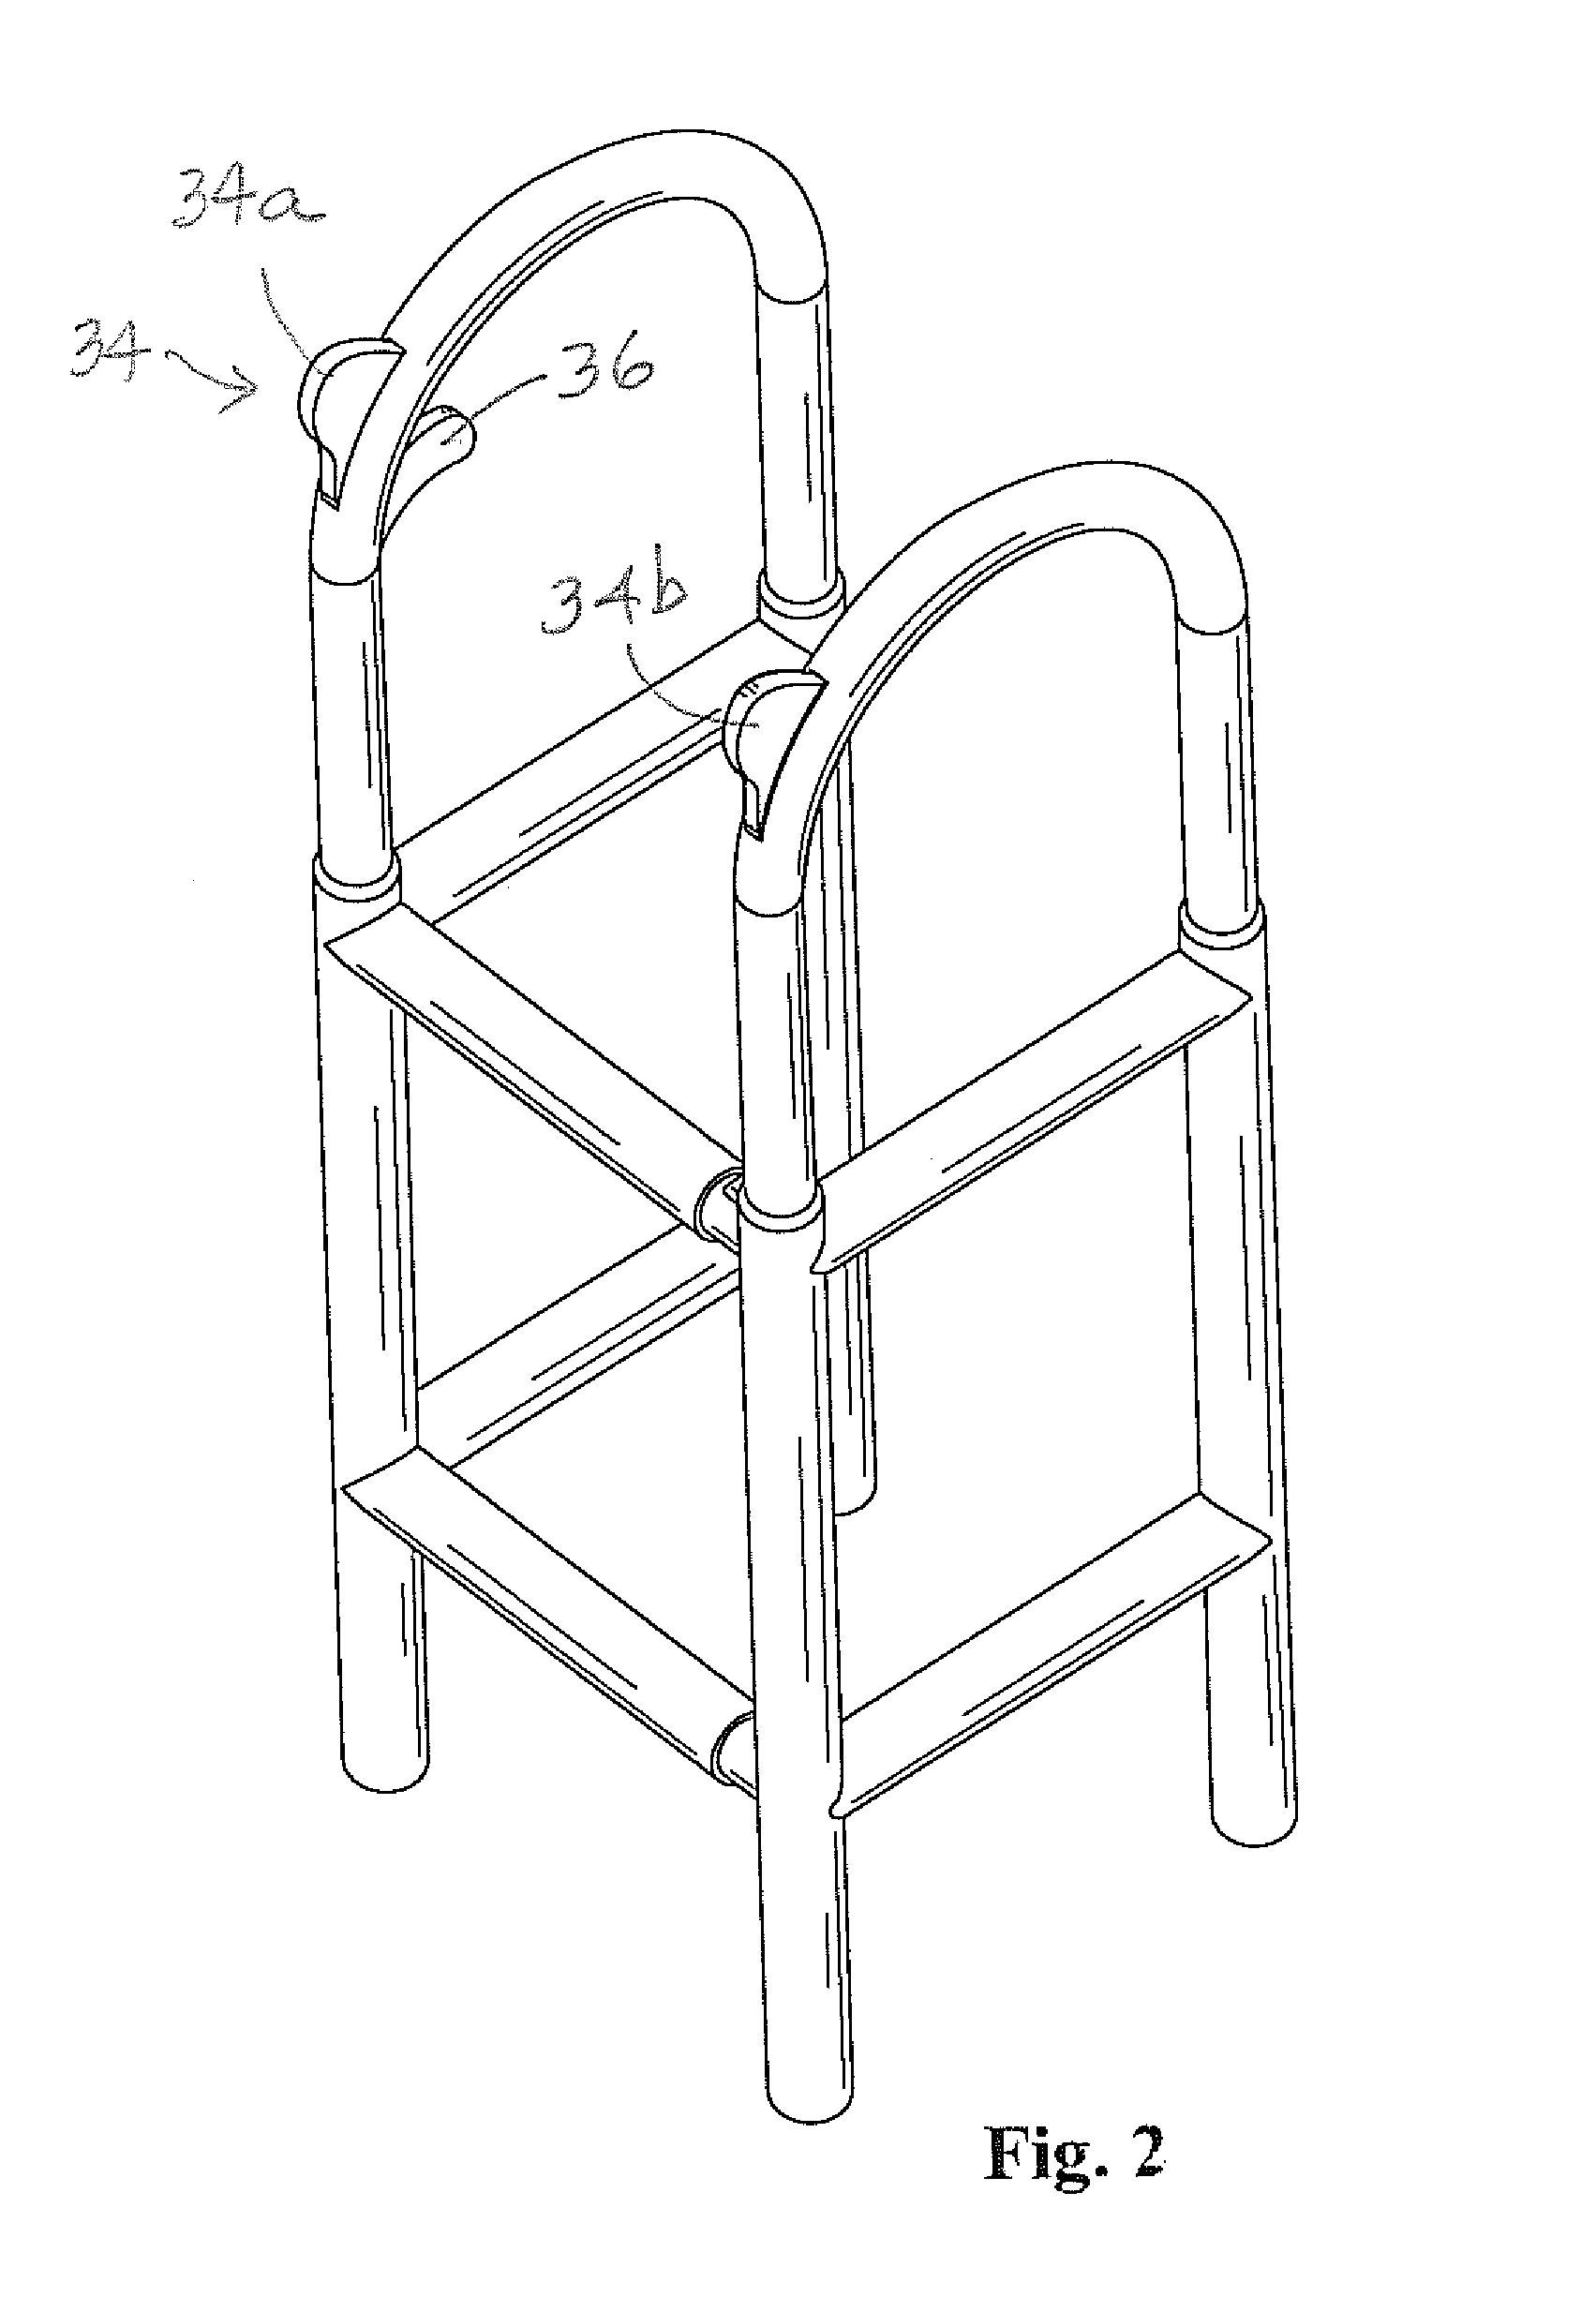 Assistive walking device with adjustable dimensions